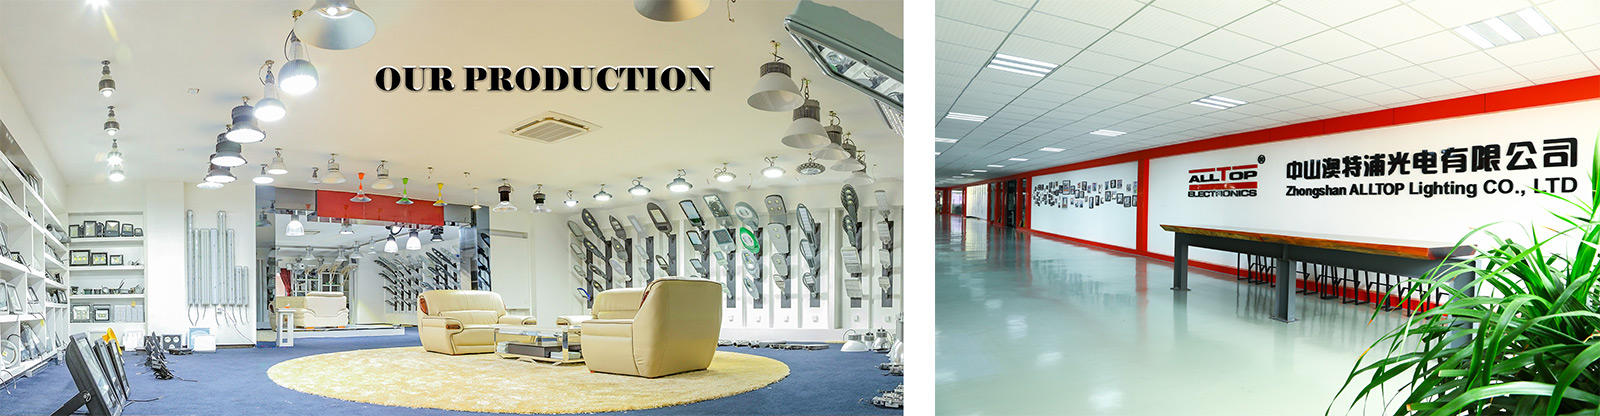 ALLTOP uv germicidal lamp suppliers factory for air disinfection